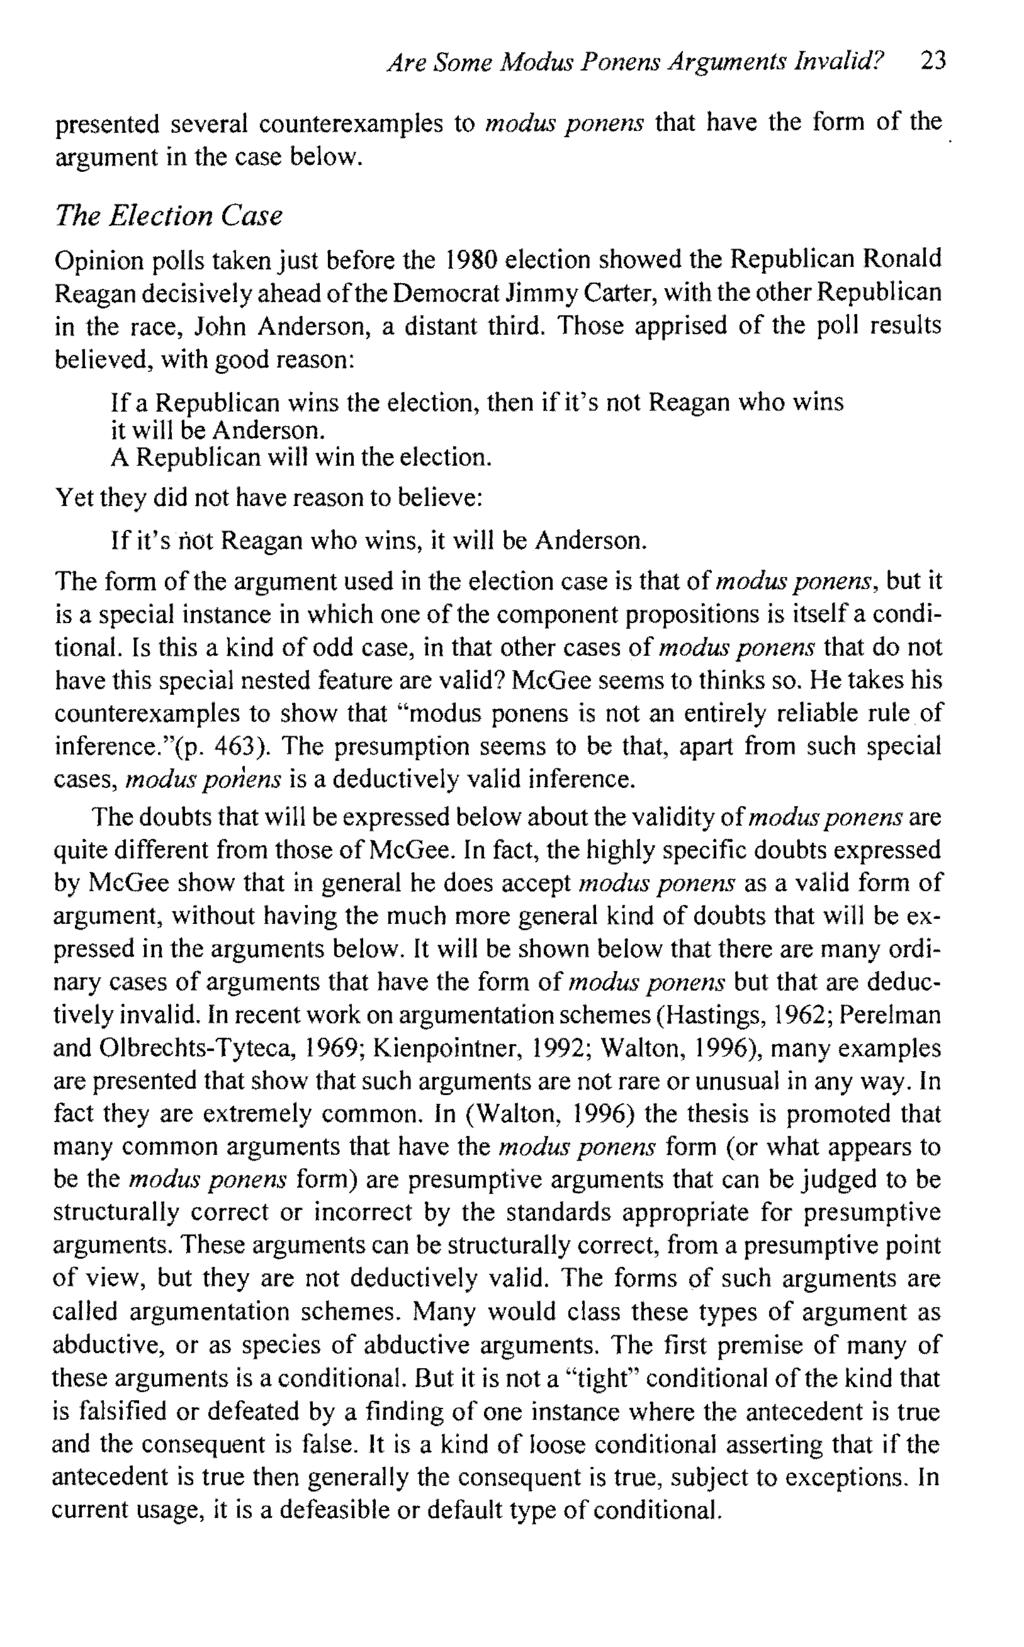 Are Some Modus Ponens Arguments Invalid? 23 presented several counterexamples to modus ponens that have the form of the argument in the case below.